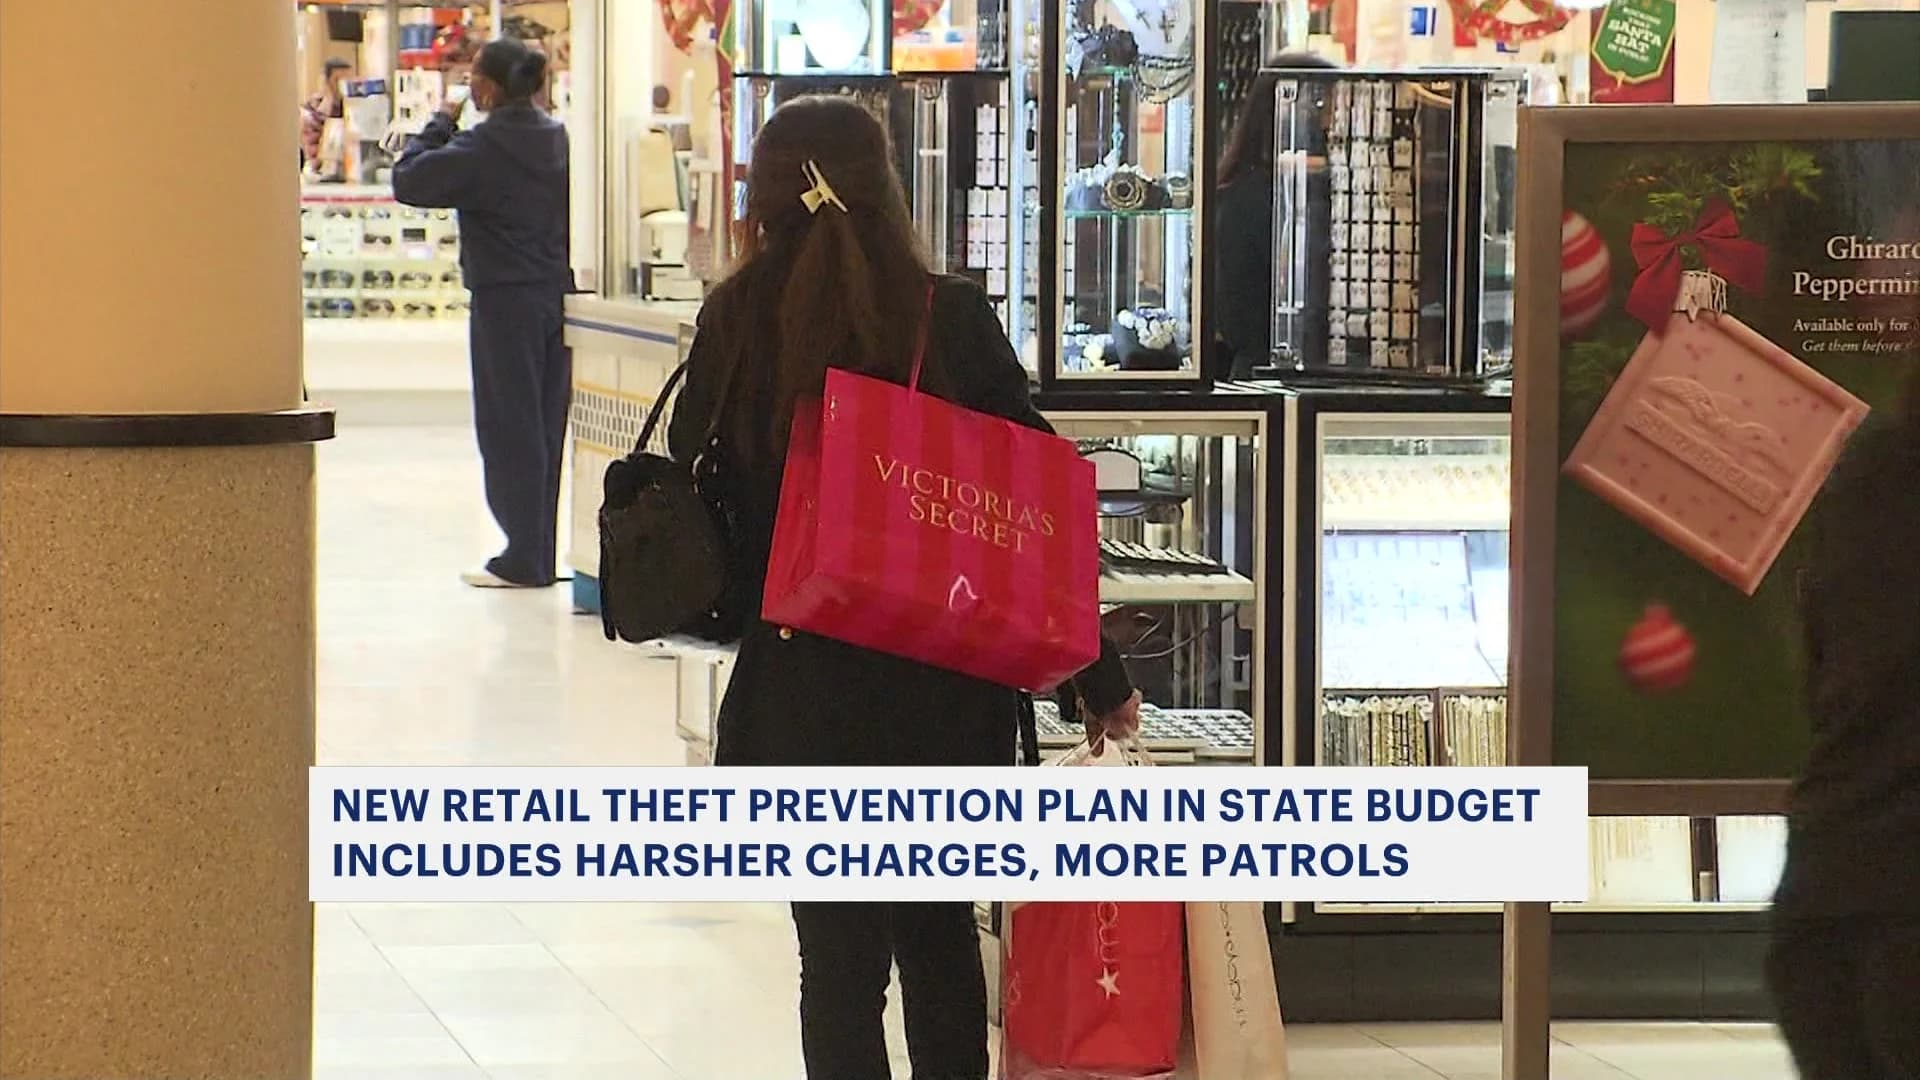 New retail theft prevention plan in state budget includes harsher charges, more patrols